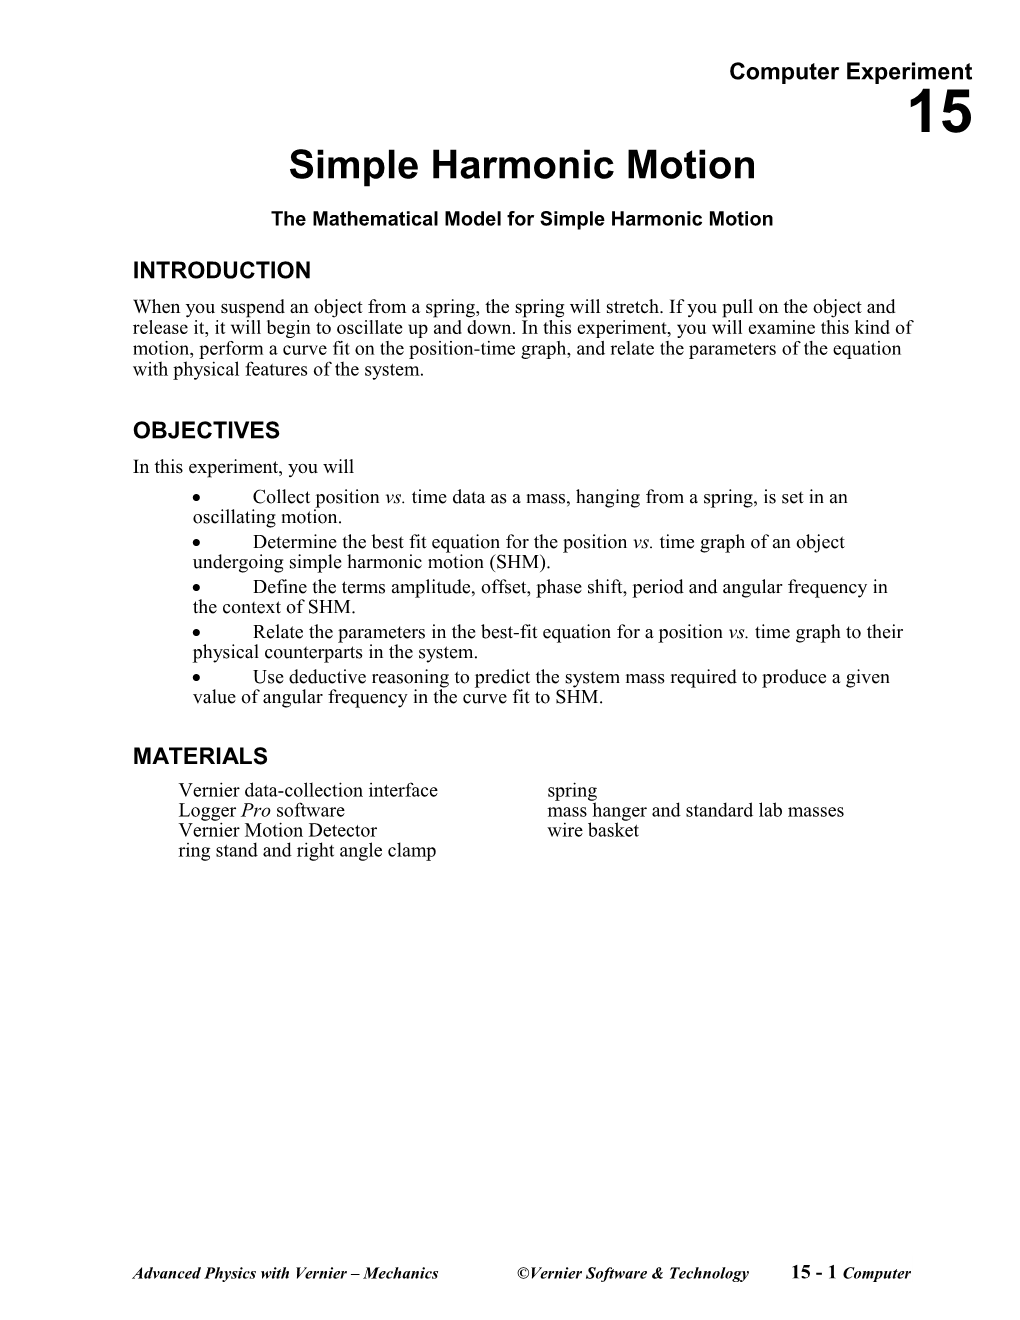 The Mathematical Model for Simple Harmonic Motion